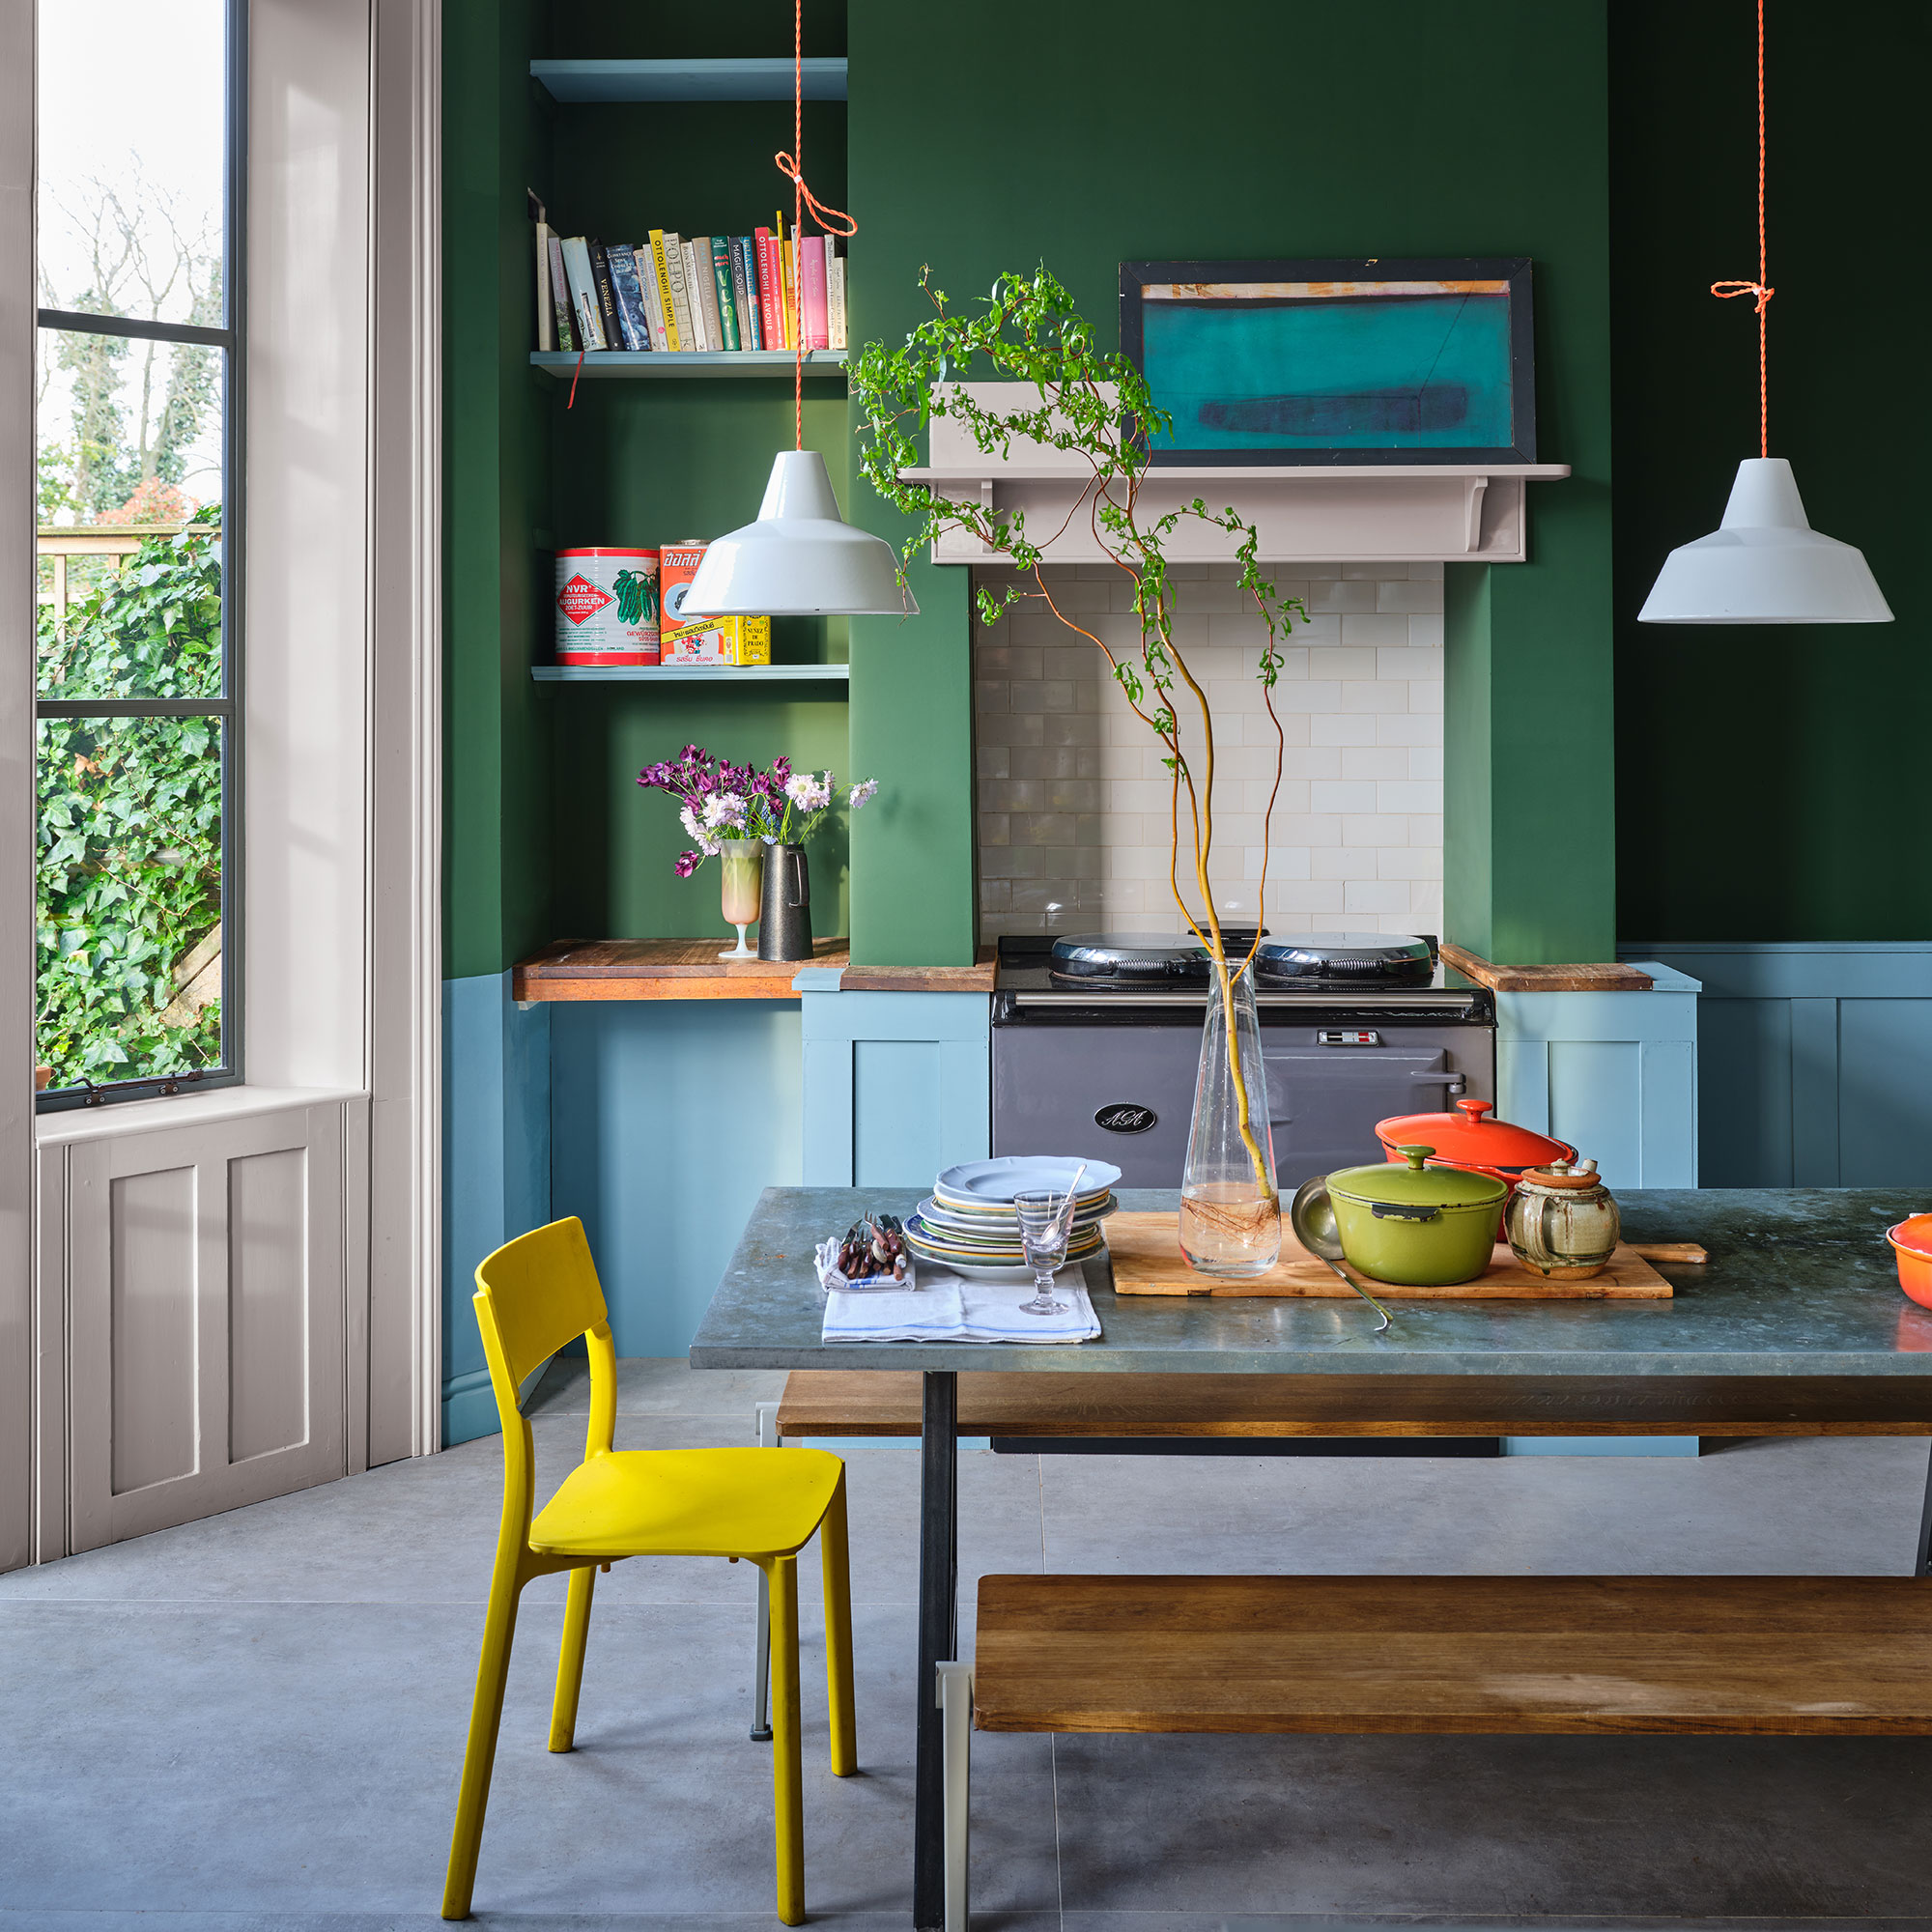 Expect Bright Colors to Influence 2020 Color and Design Trends